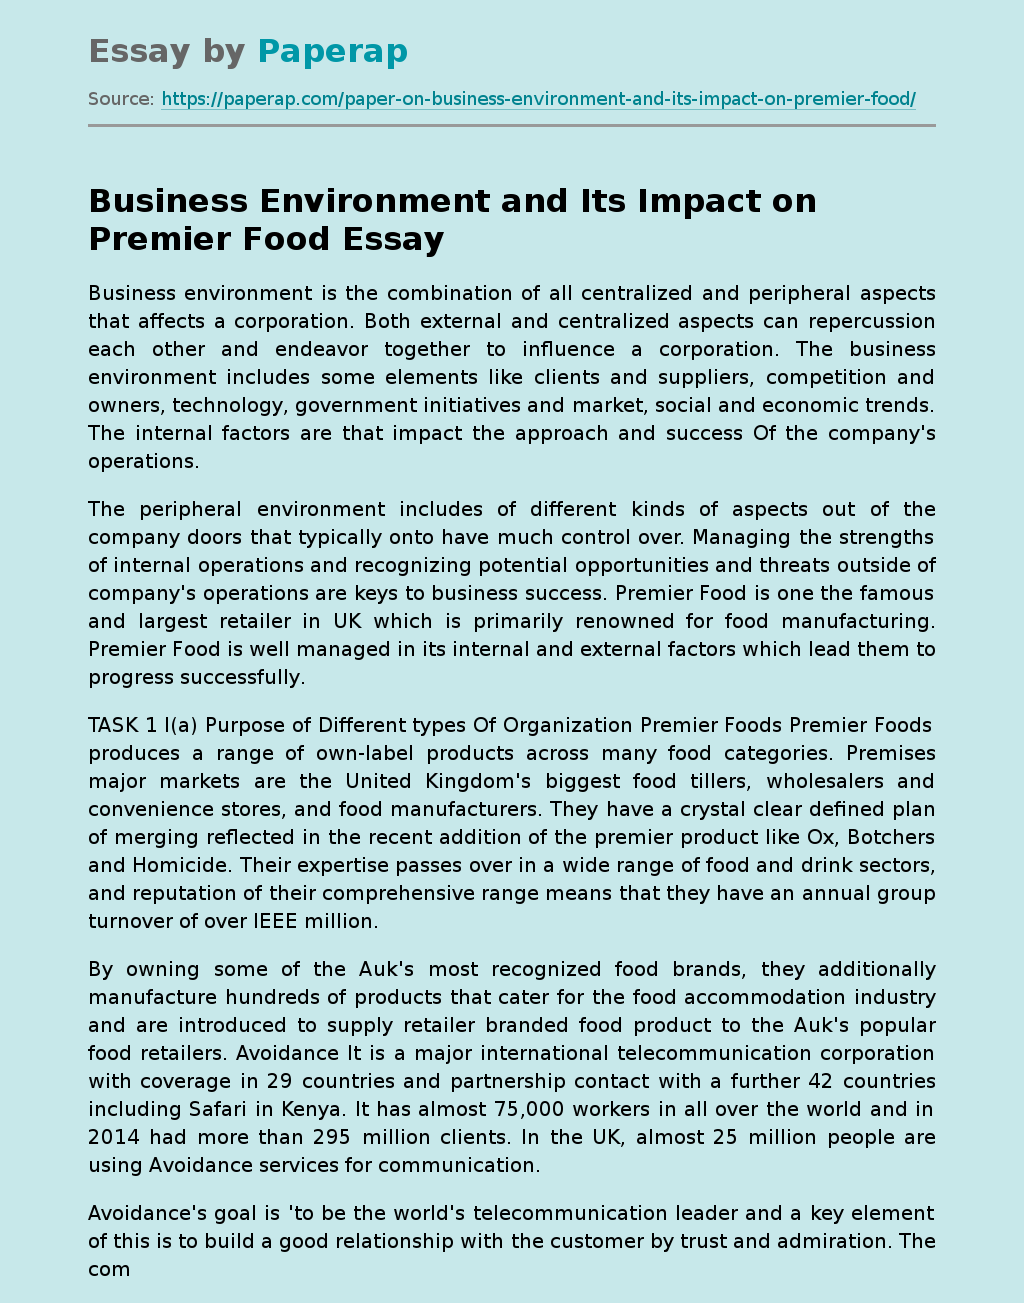 Business Environment and Its Impact on Premier Food